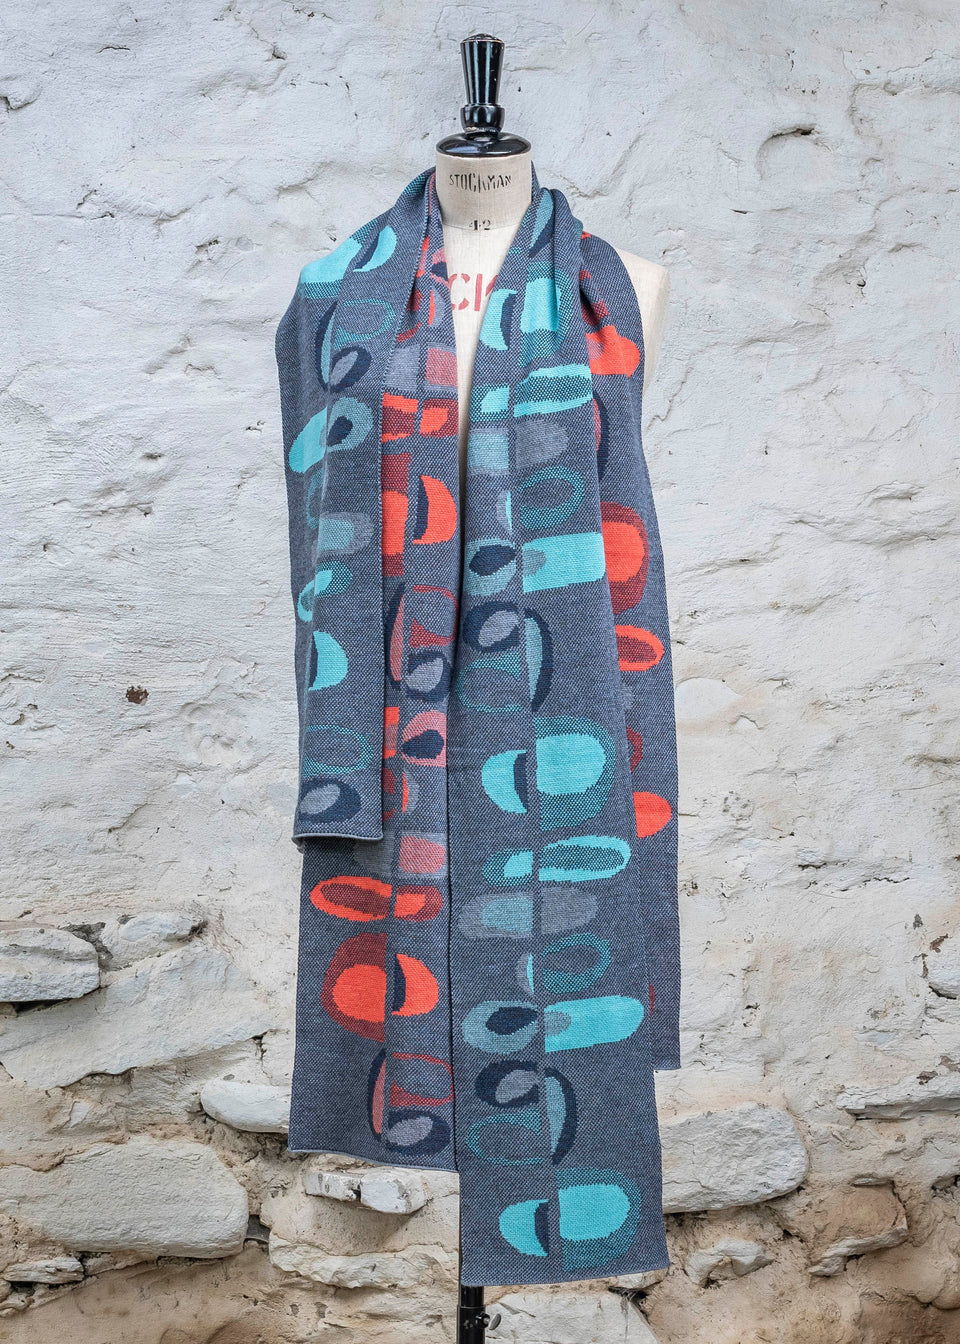 Knitted scarf in blues with accents in aqua or coral. The pattern is abstract